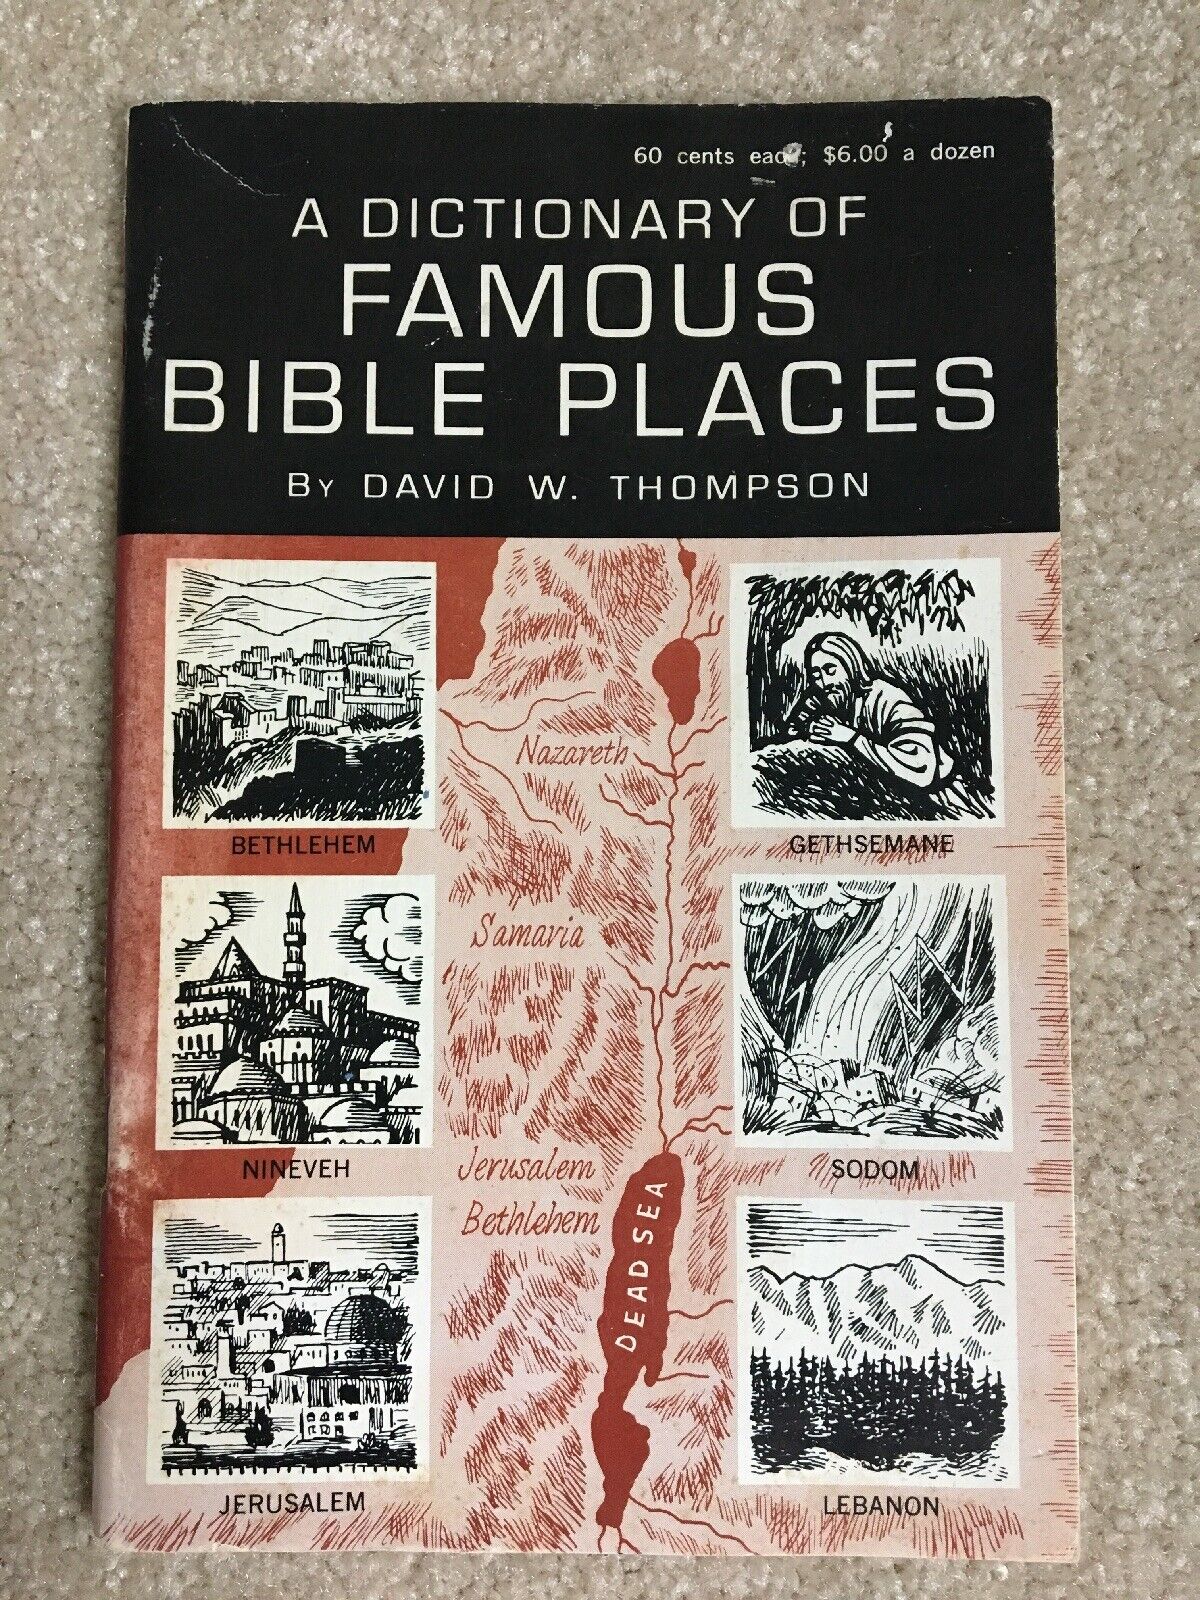 1965 Dictionary of Famous Bible Places David W. Thompson 1st edition paperback